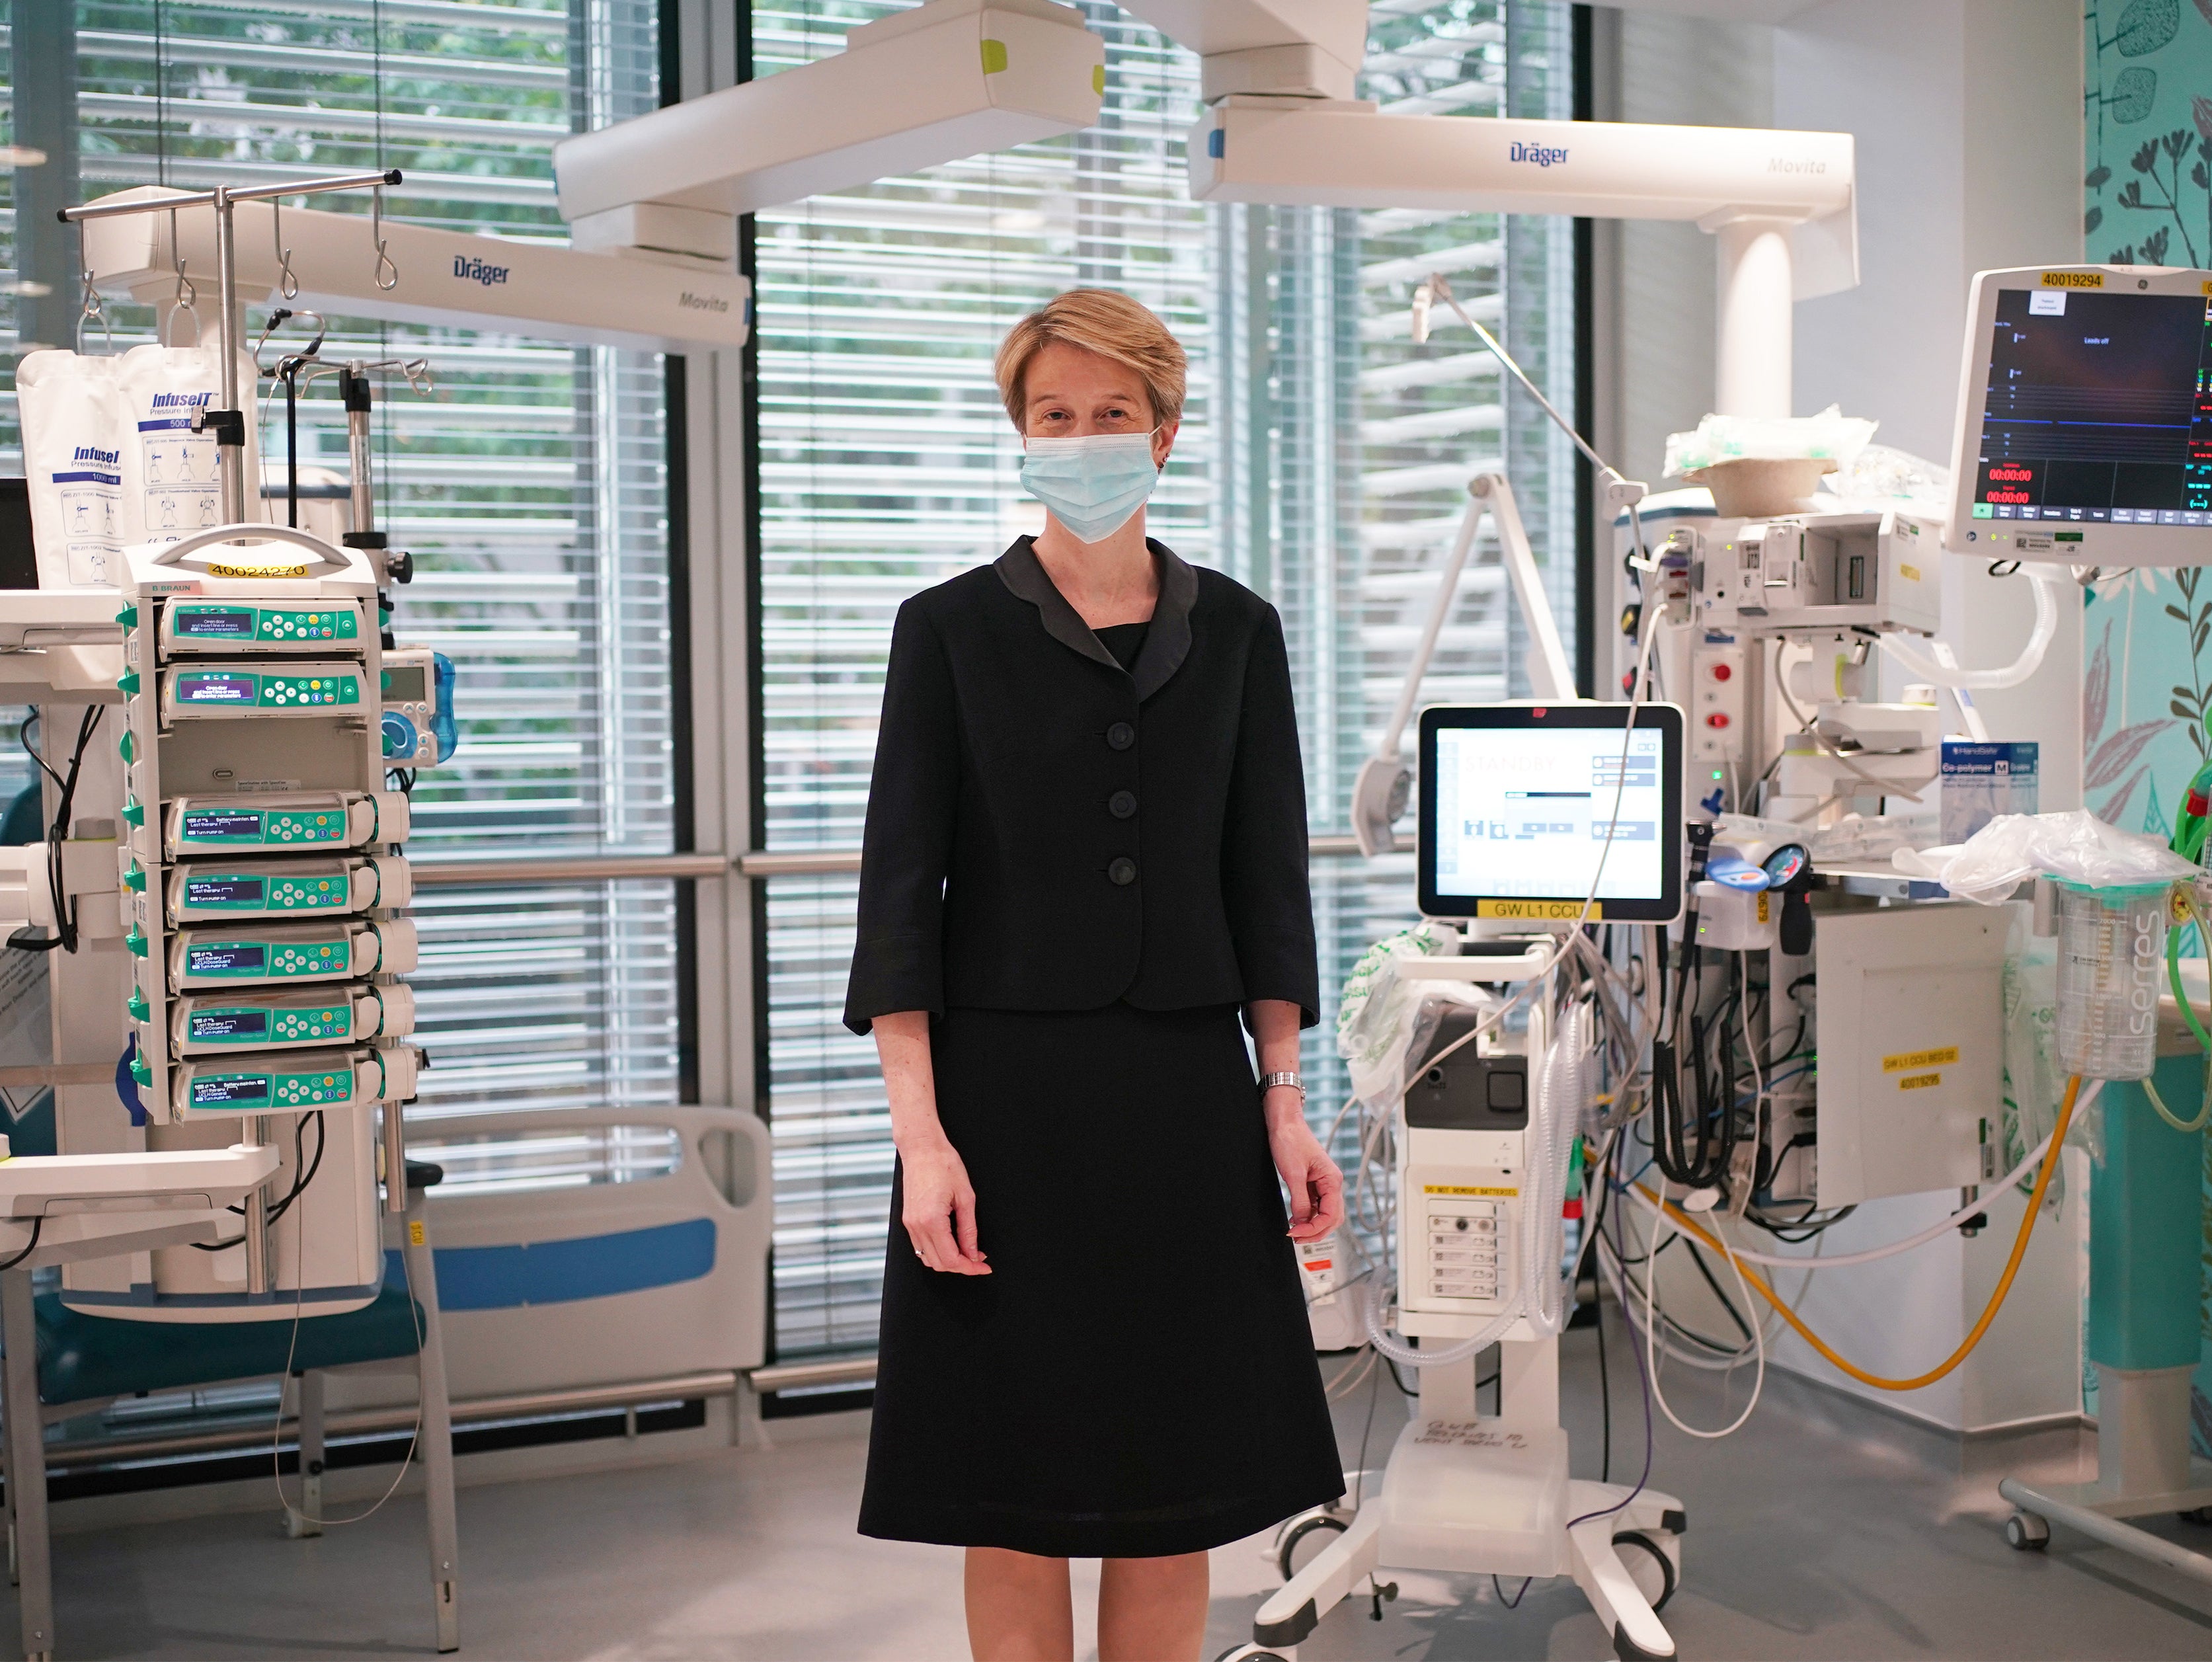 Amanda Pritchard during a visit to University College Hospital London, following the announcement of her appointment as the new chief executive of the NHS in England.